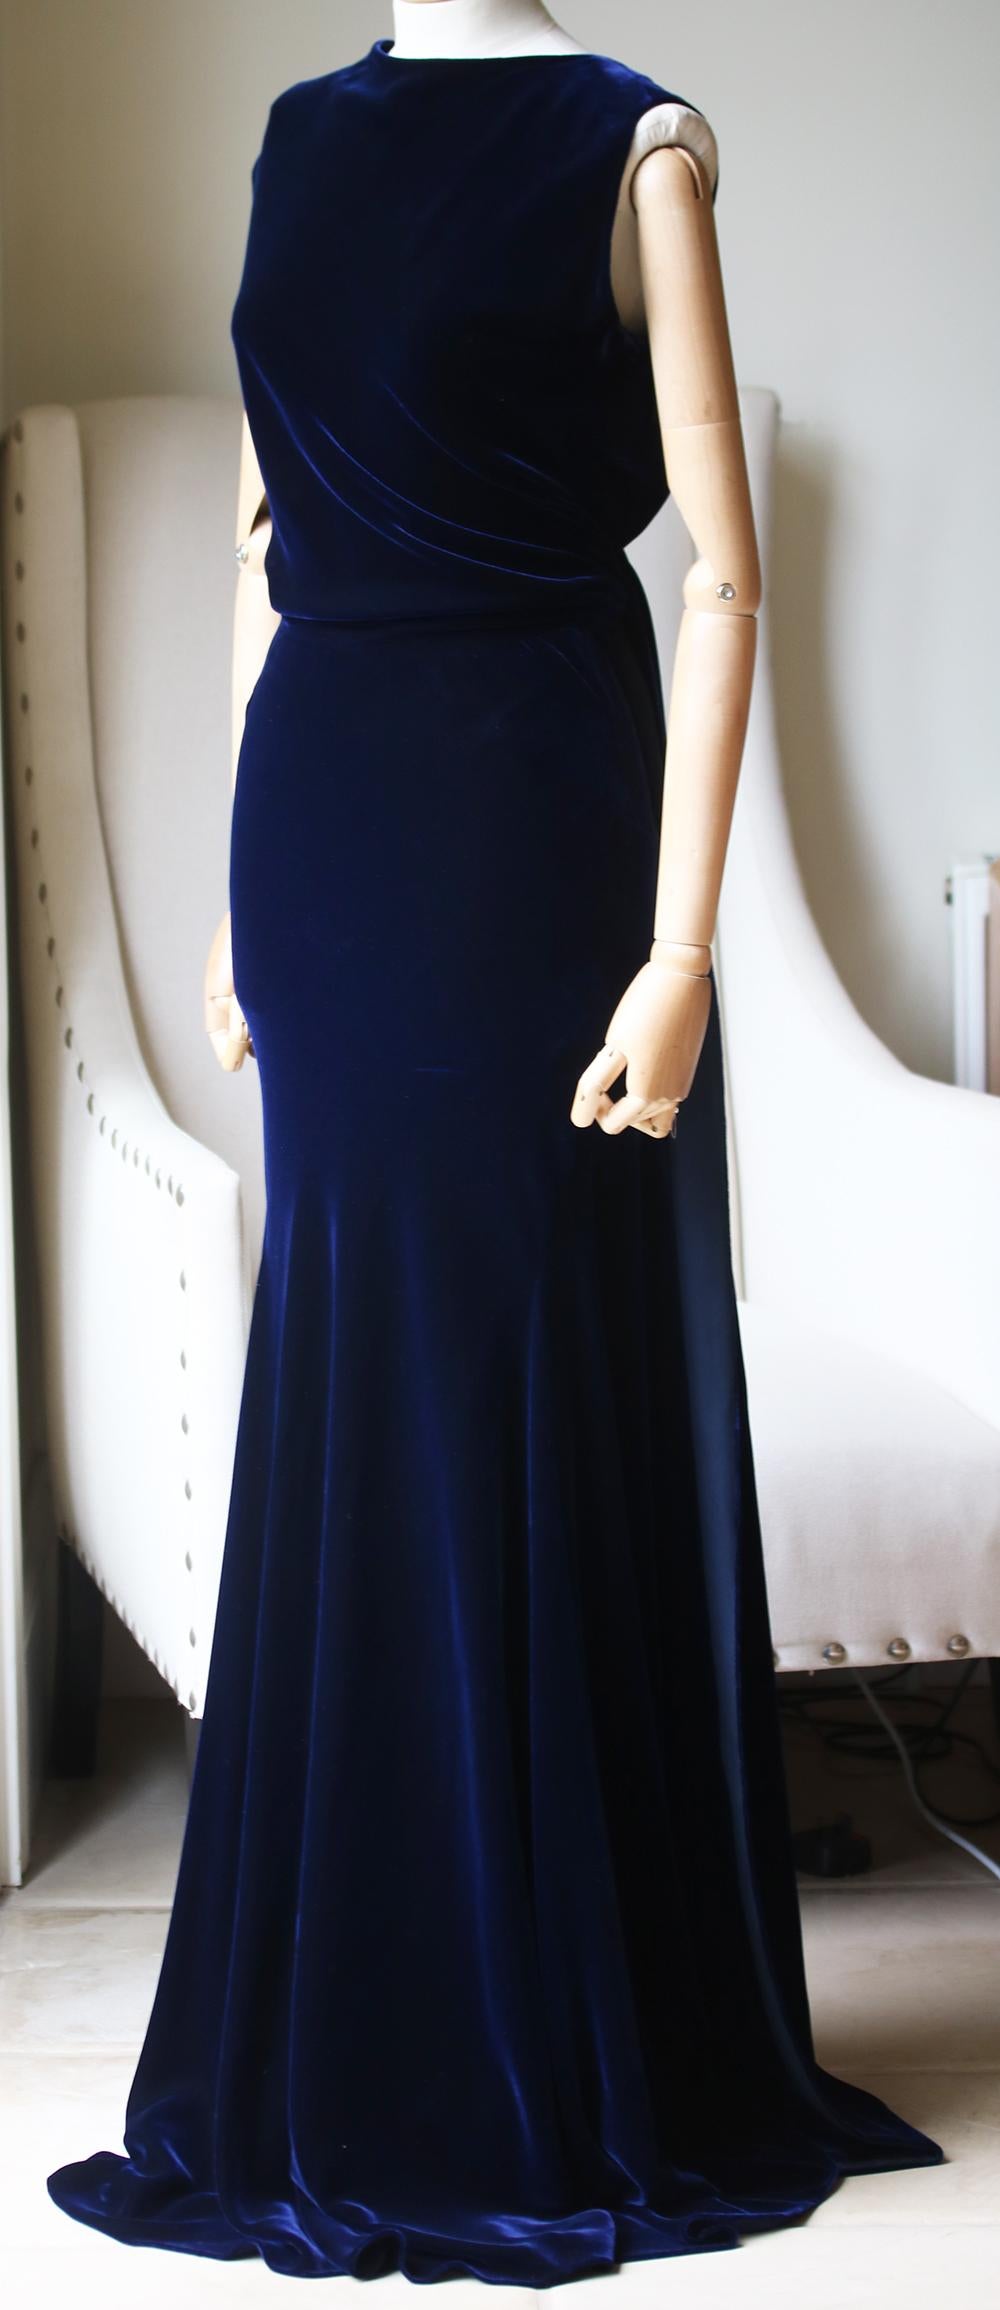 This rich navy-blue Alaïa sleeveless silk velvet gown is crafted in Italy from silk with a high draped neckline and concealed low-back. Toni Morrison once wrote that ‘velvet is like the world was just born. Clean and new and so smooth.’